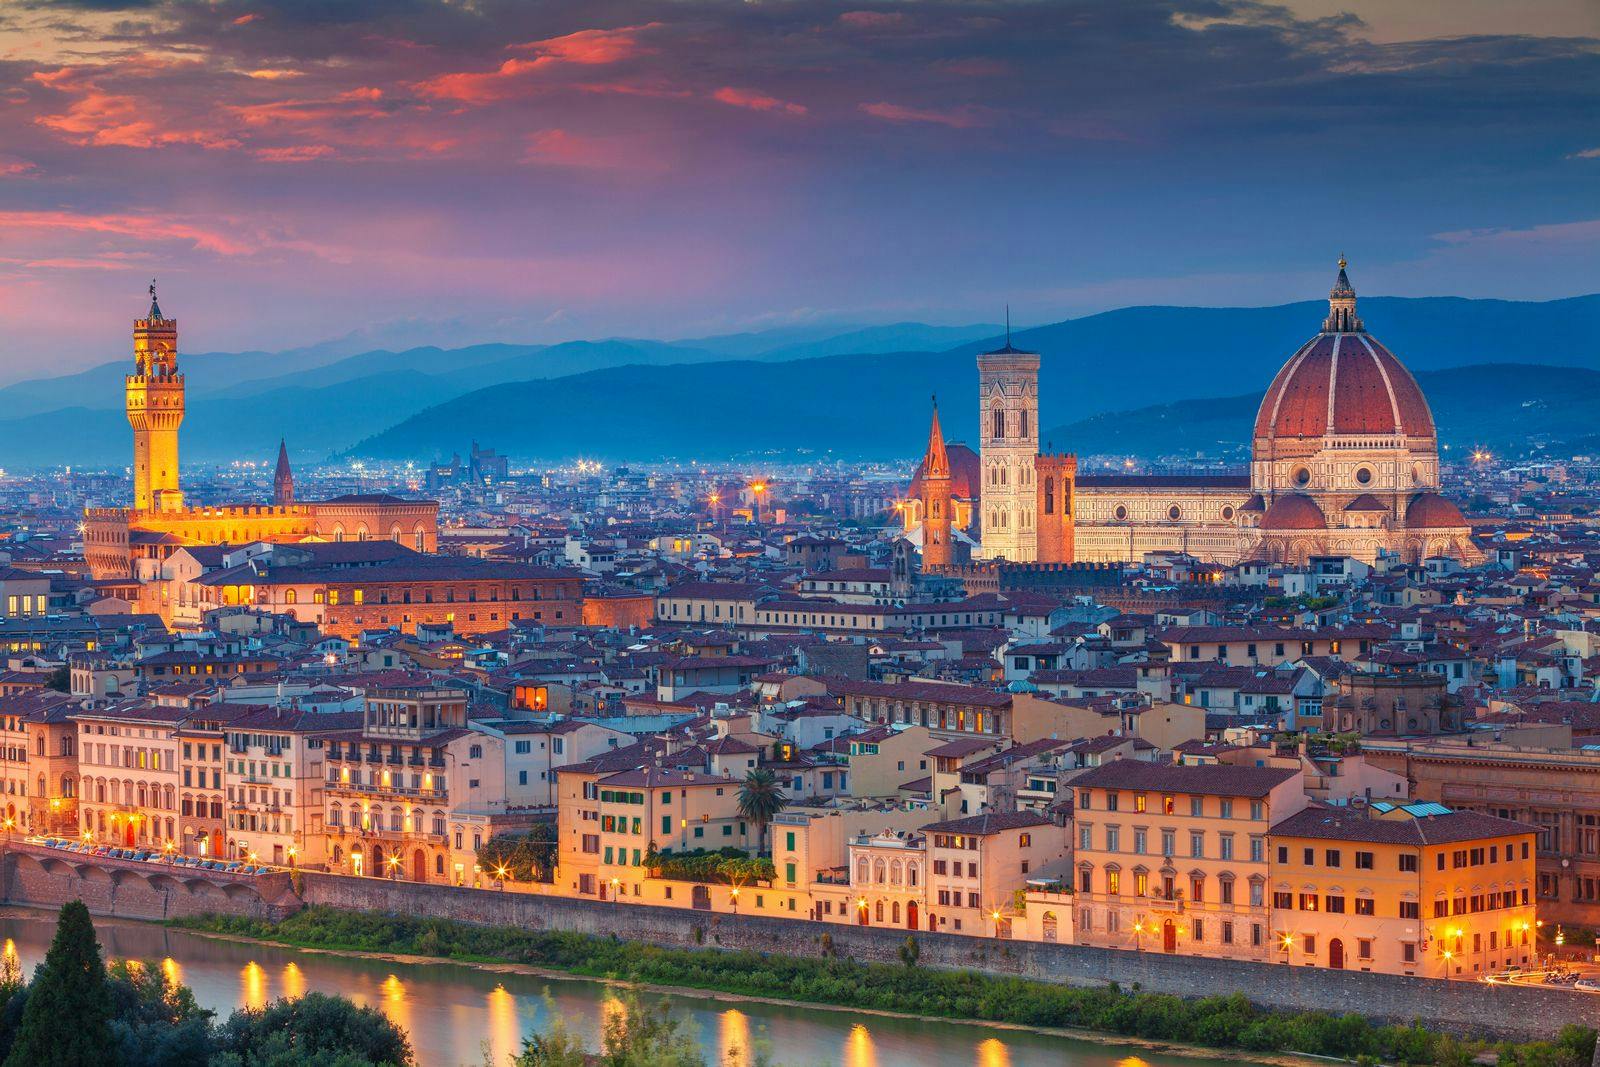 Dusk skyline view of the city of Florence in Italy with domed cathedral and tower